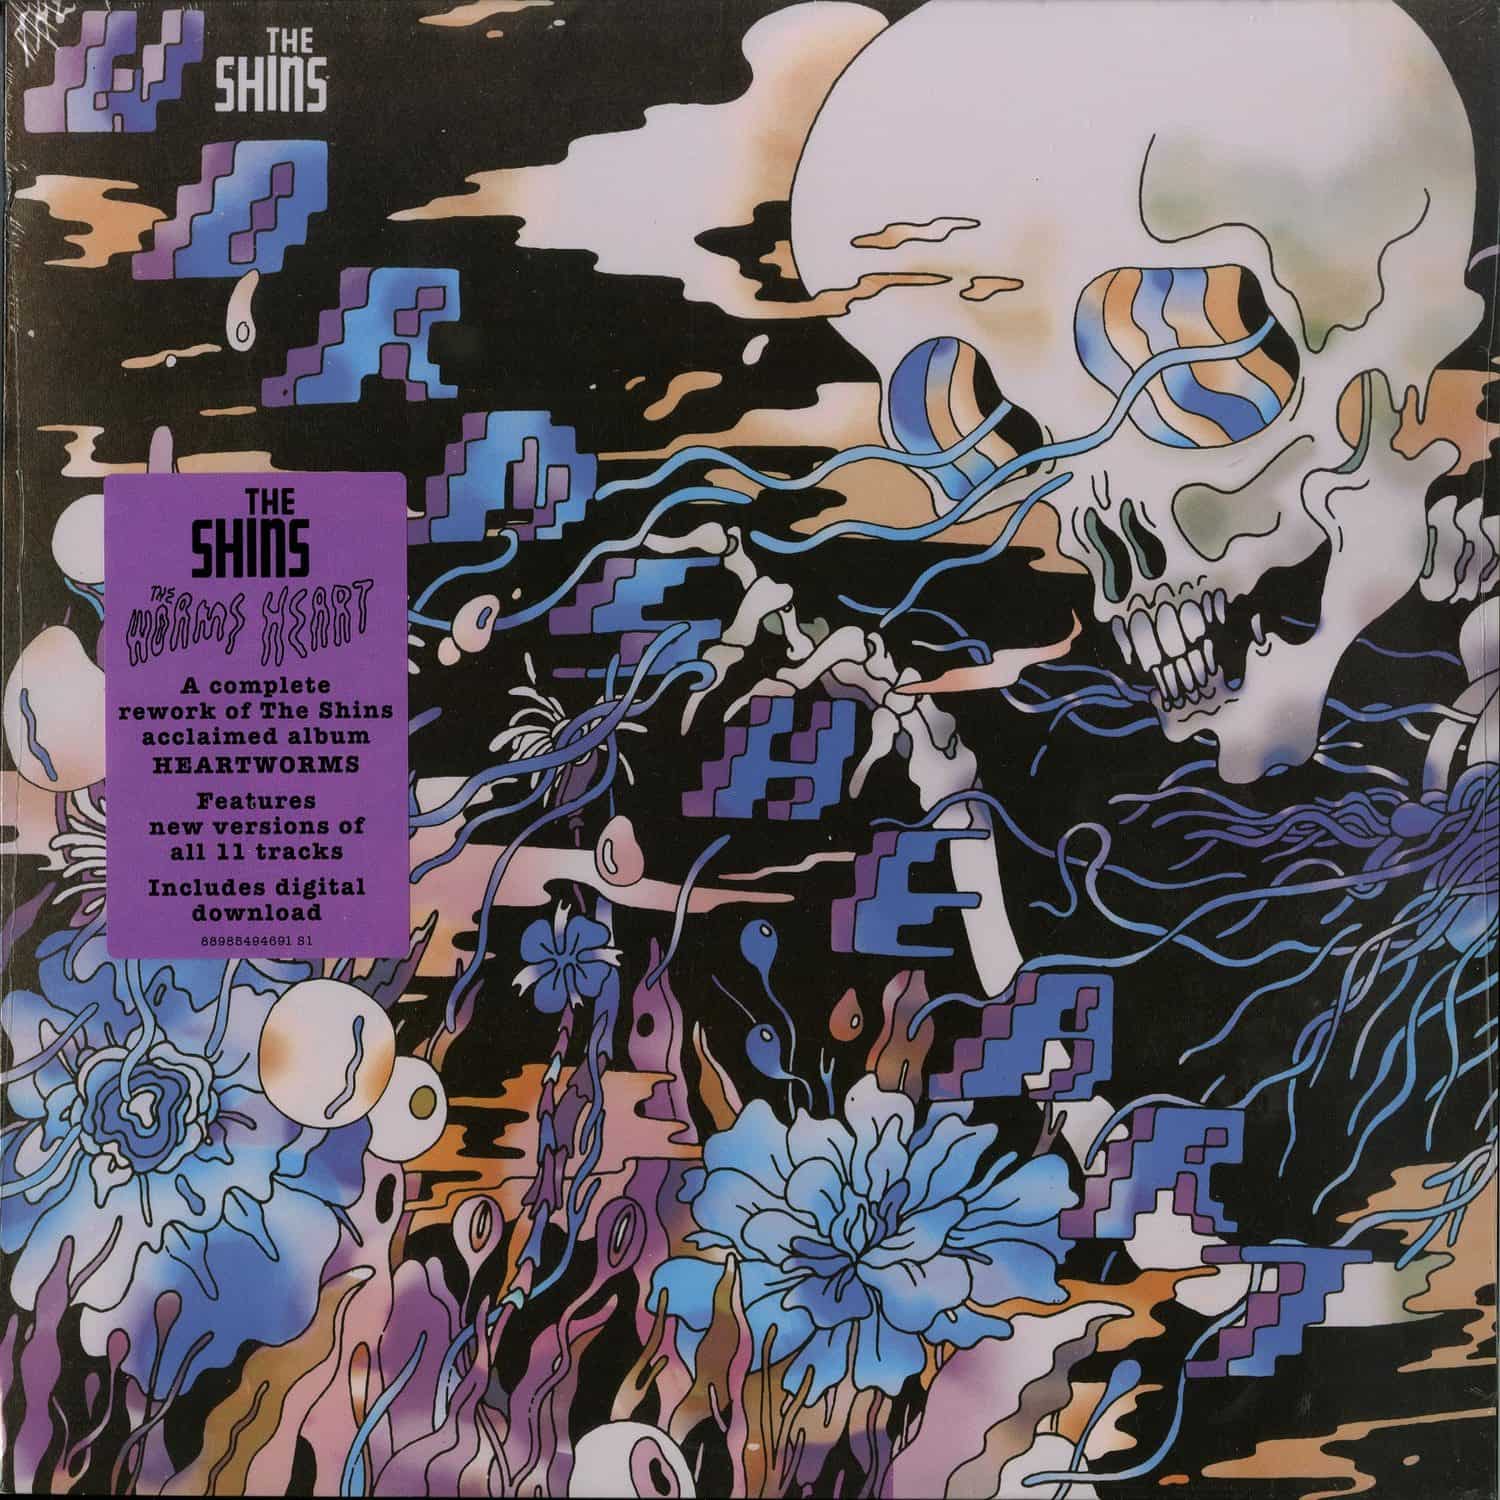 The Shins - THE WORMS HEART 